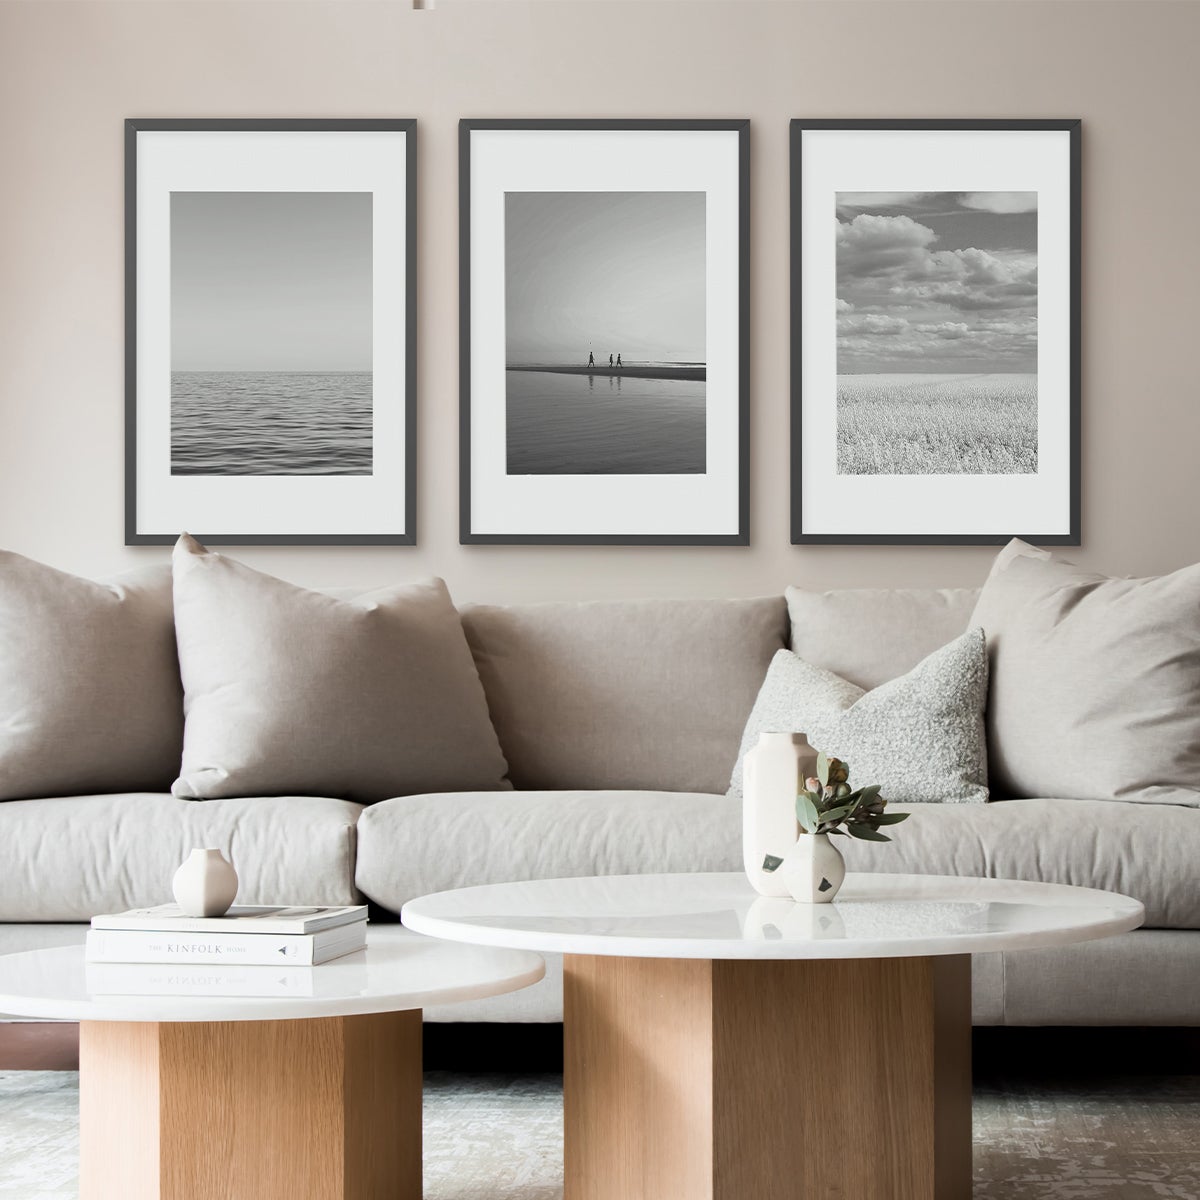 Three identical Artifact Uprising Modern Metal Frames hung in horizontal succession with different photos featuring similar hues